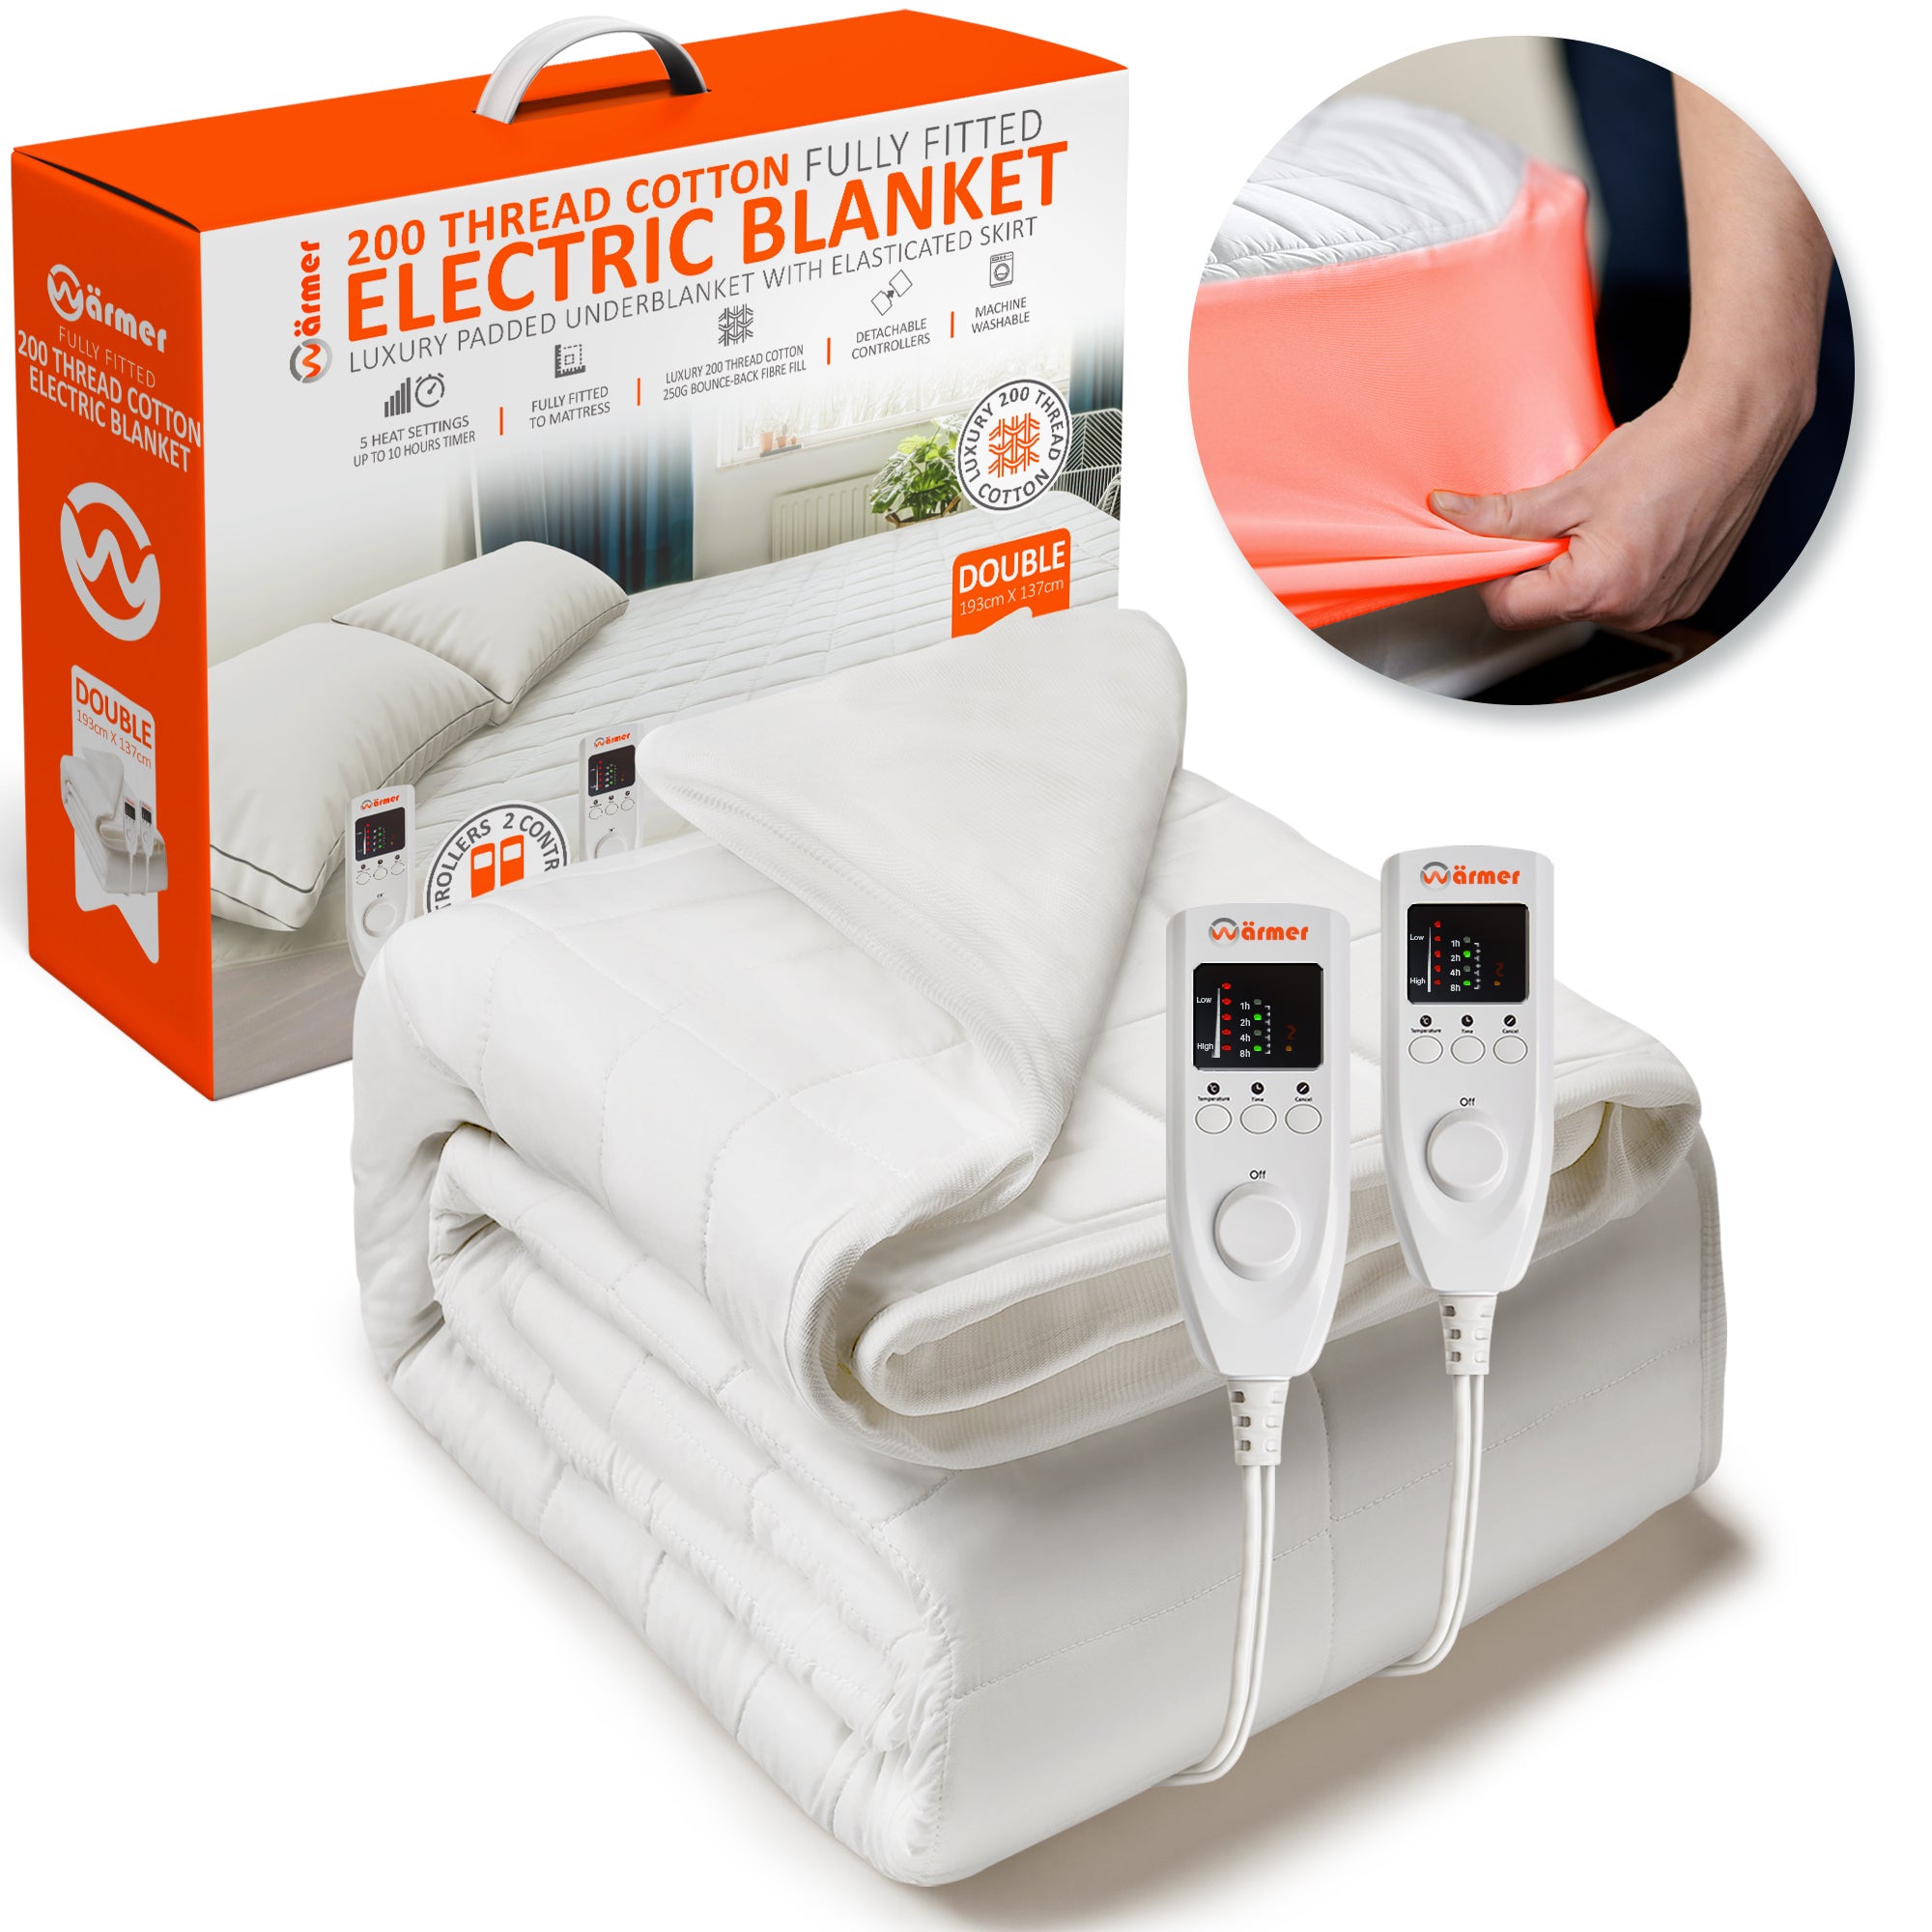 Wärmer 200 Thread Cotton Fully Fitted Electric Blanket